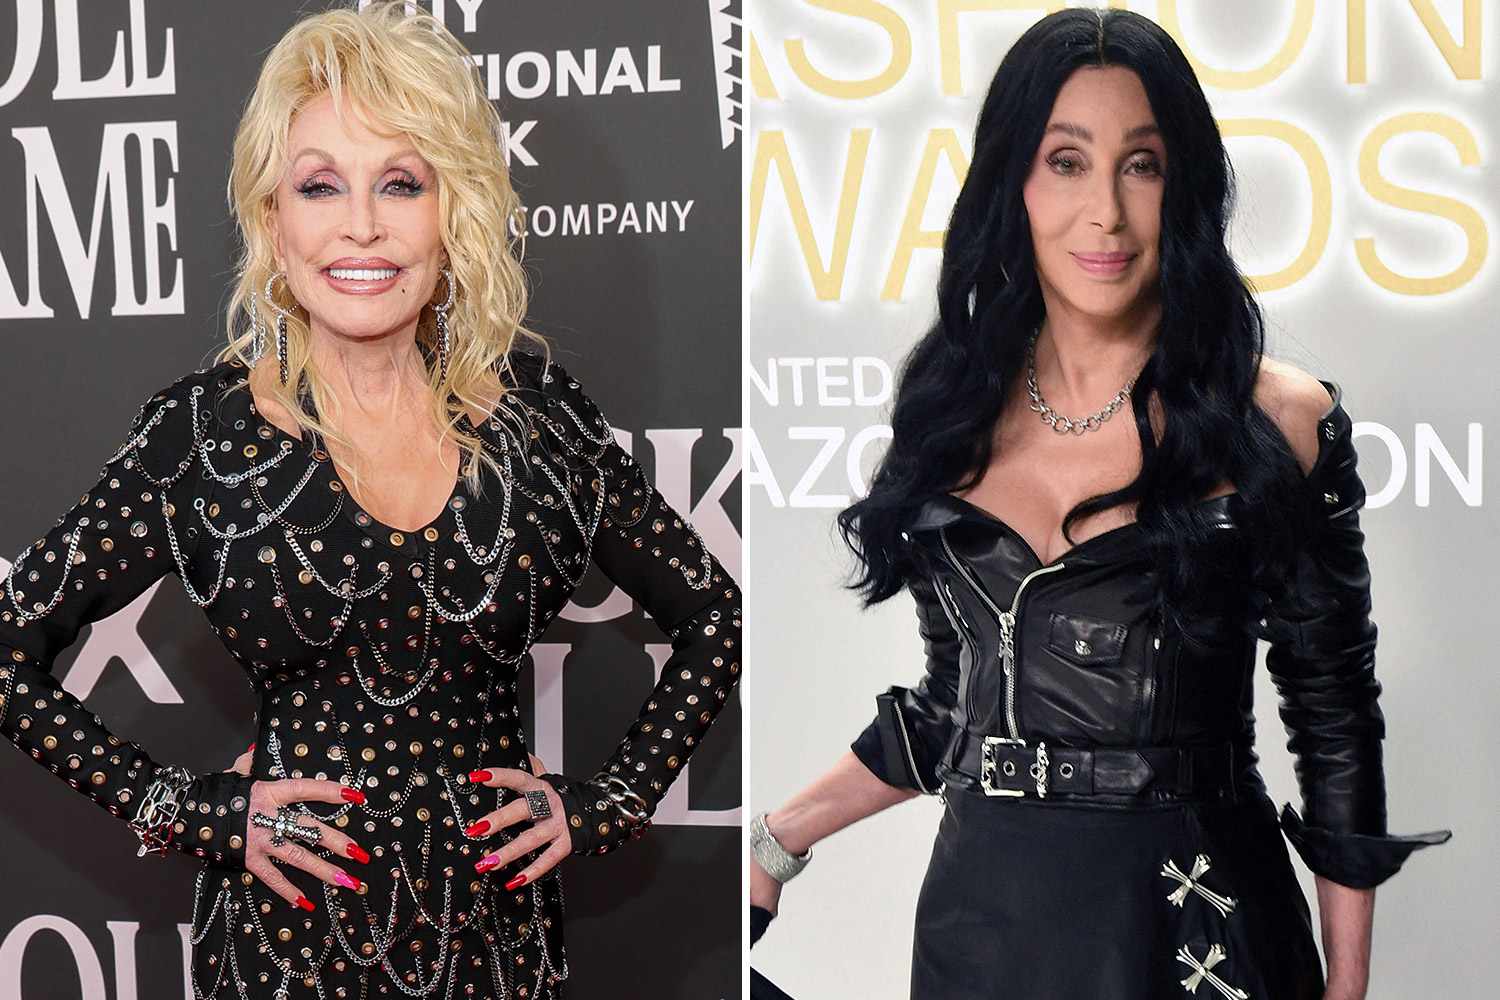 You Won’t Believe How Dolly Parton And Cher’s Hair Looks Without A Wing!